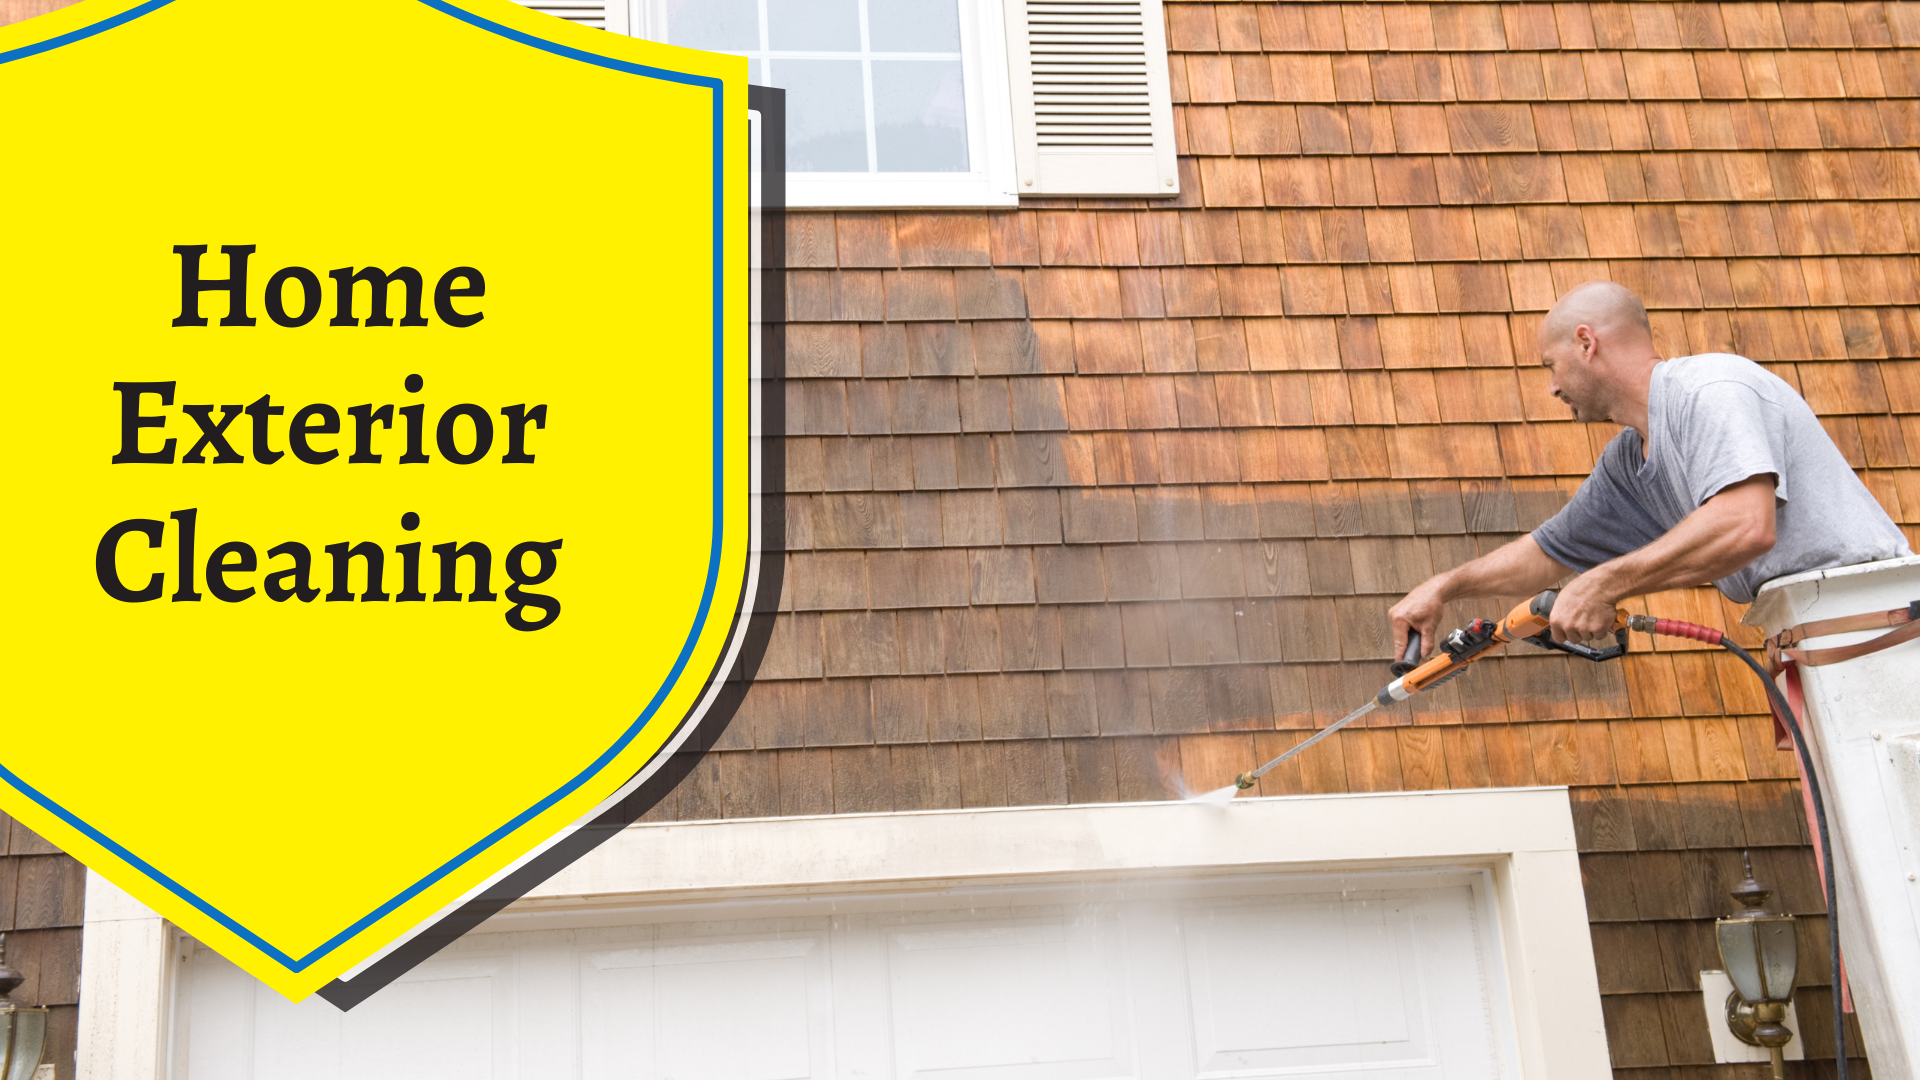 Home exterior cleaning